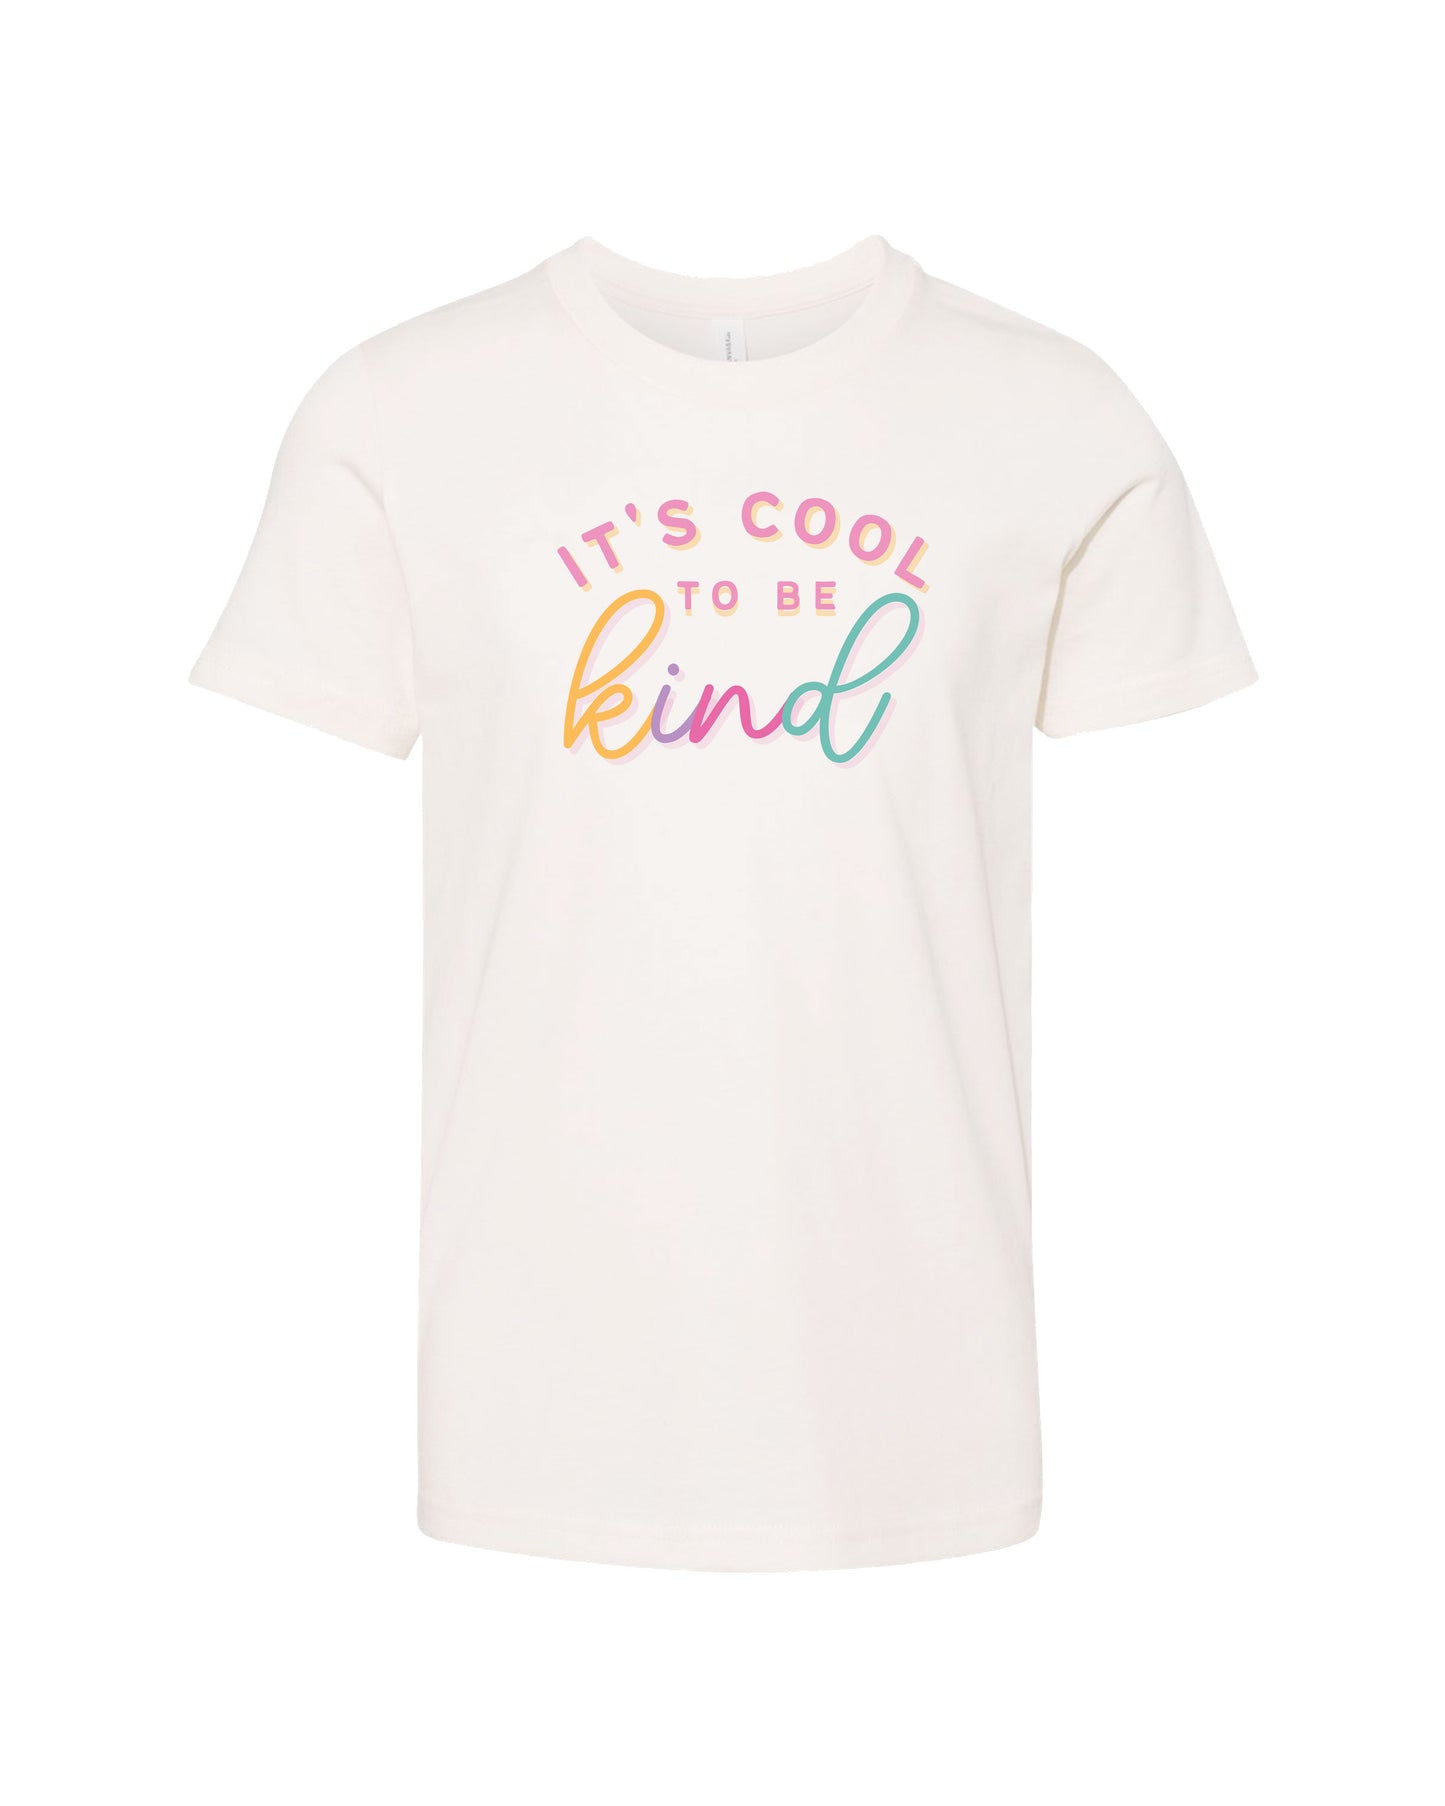 Cool To Be Kind | Kids Tee-Kids Tees-Sister Shirts-Sister Shirts, Cute & Custom Tees for Mama & Littles in Trussville, Alabama.